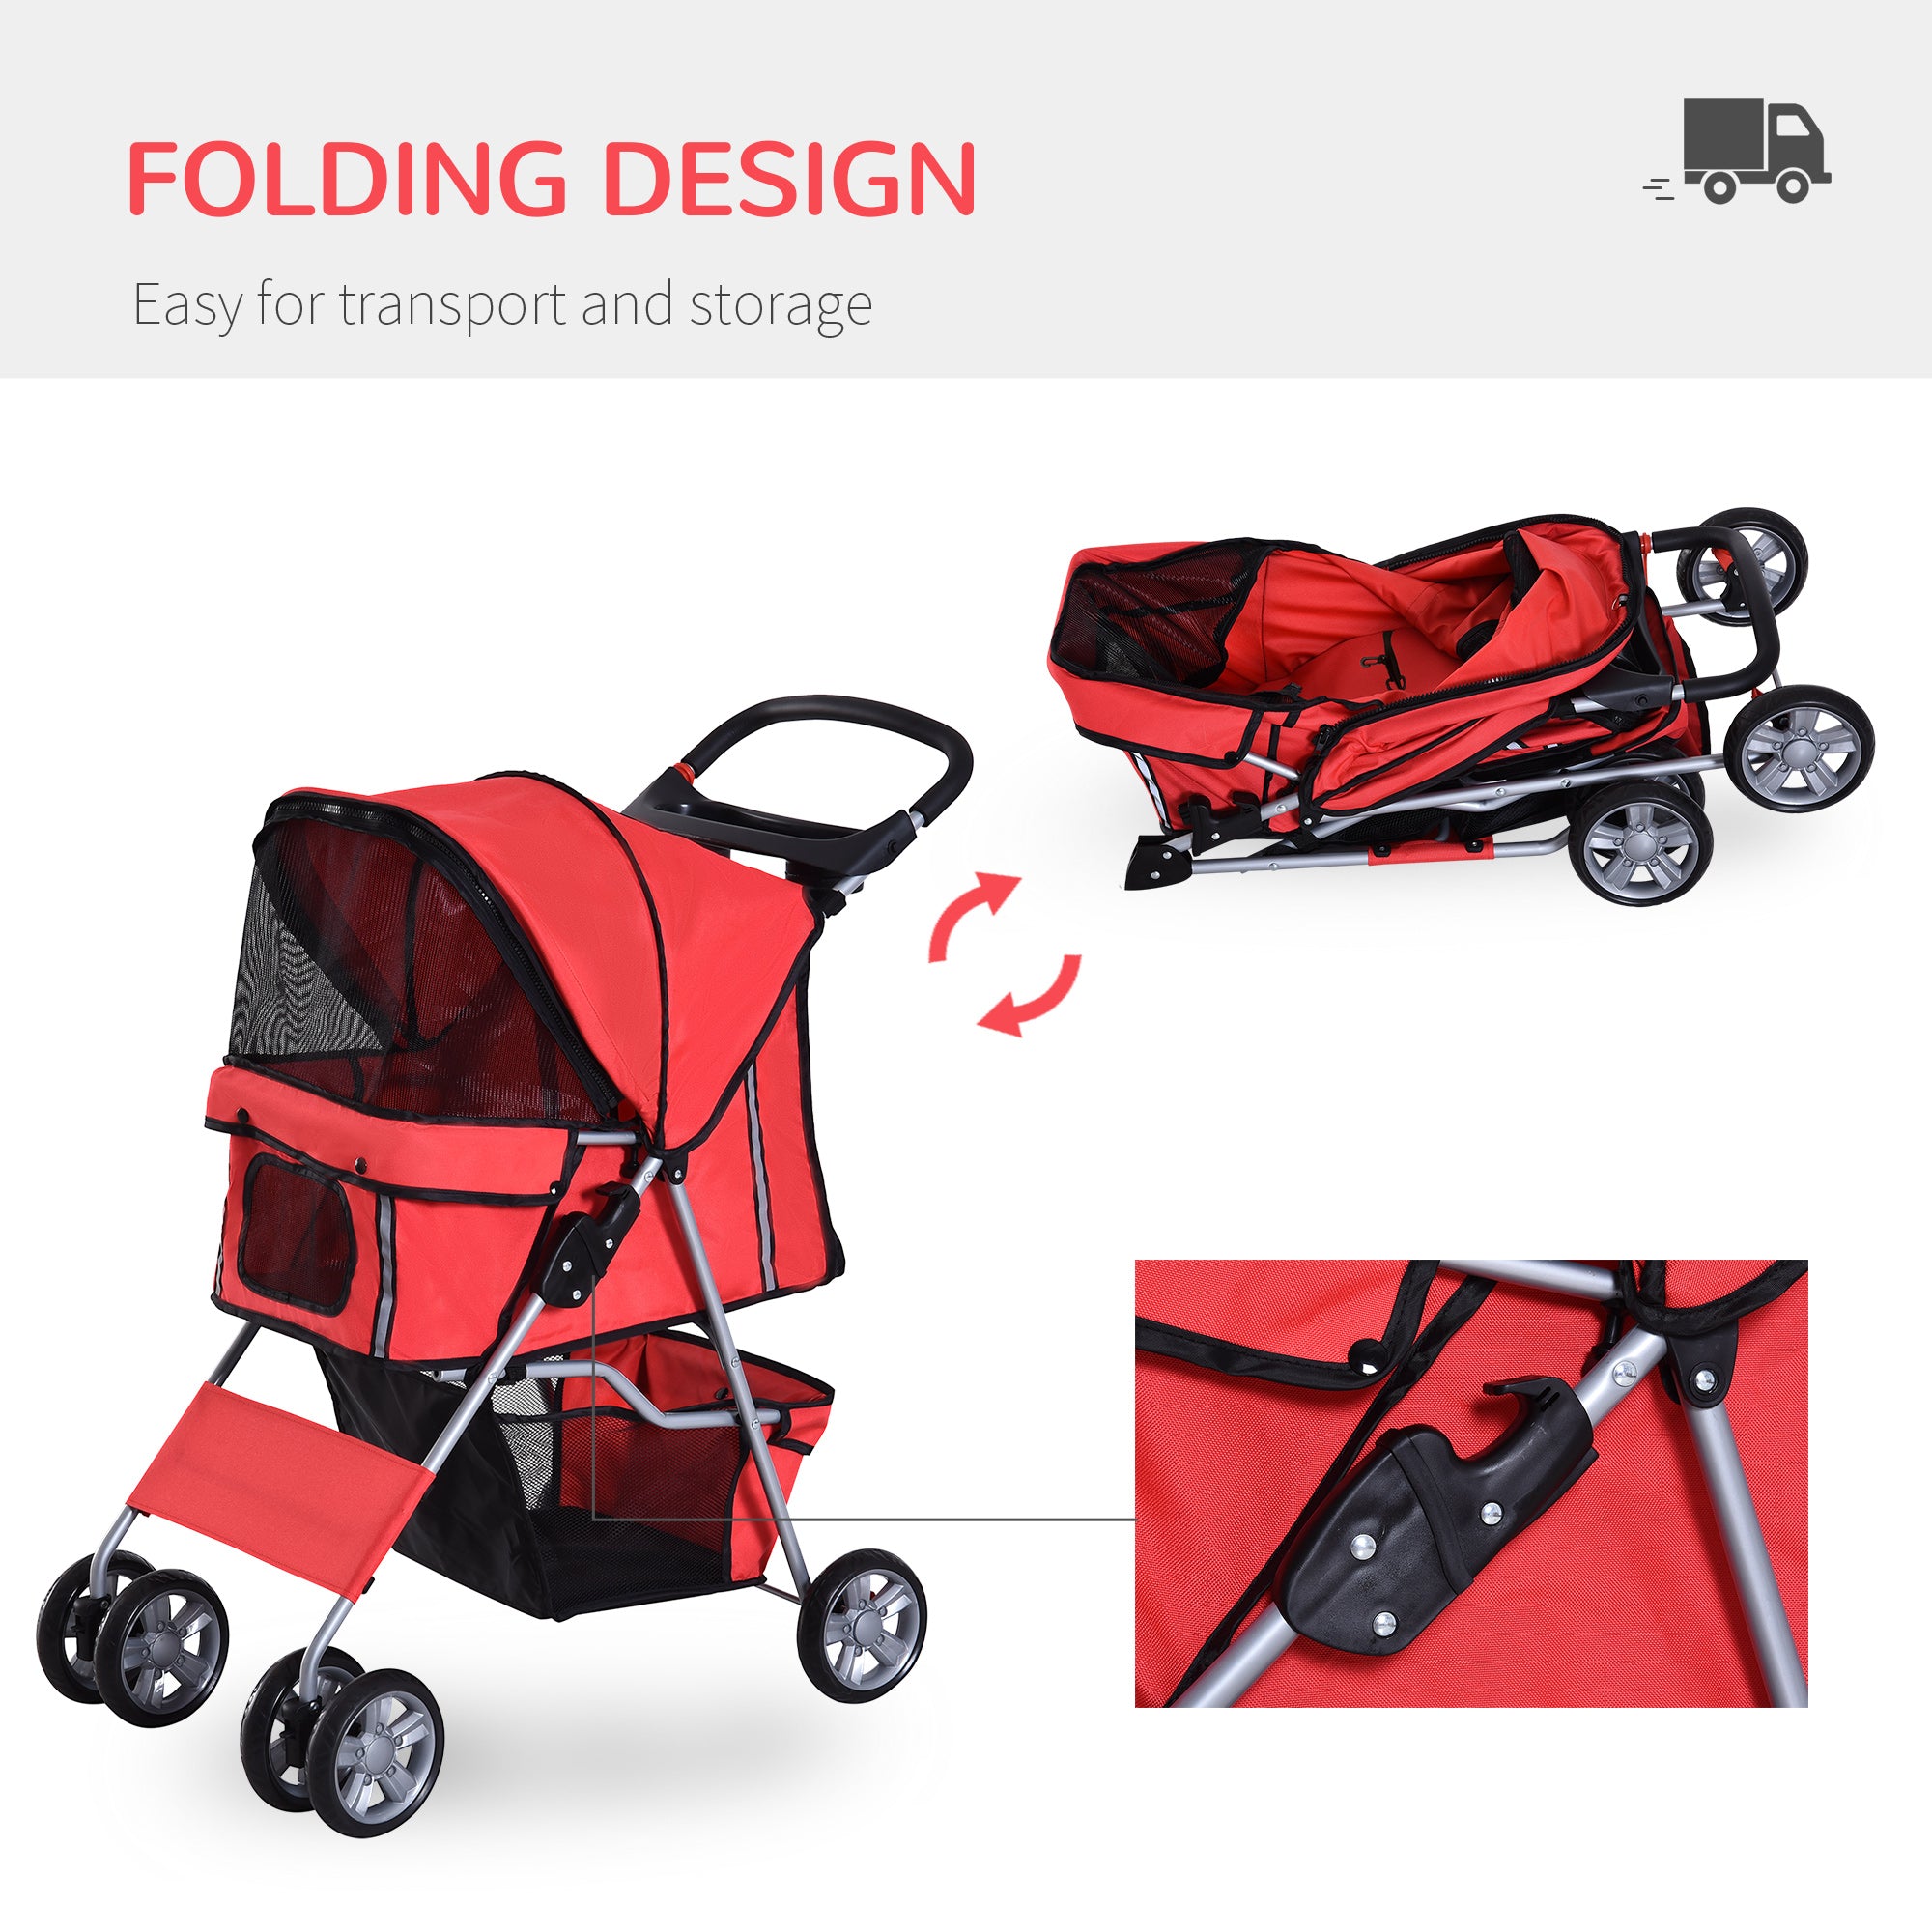 PawHut Small Dog Stroller with Rain Cover, Folding Pet Buggy with Cup Holder, Storage Basket & Reflective Strips, Red